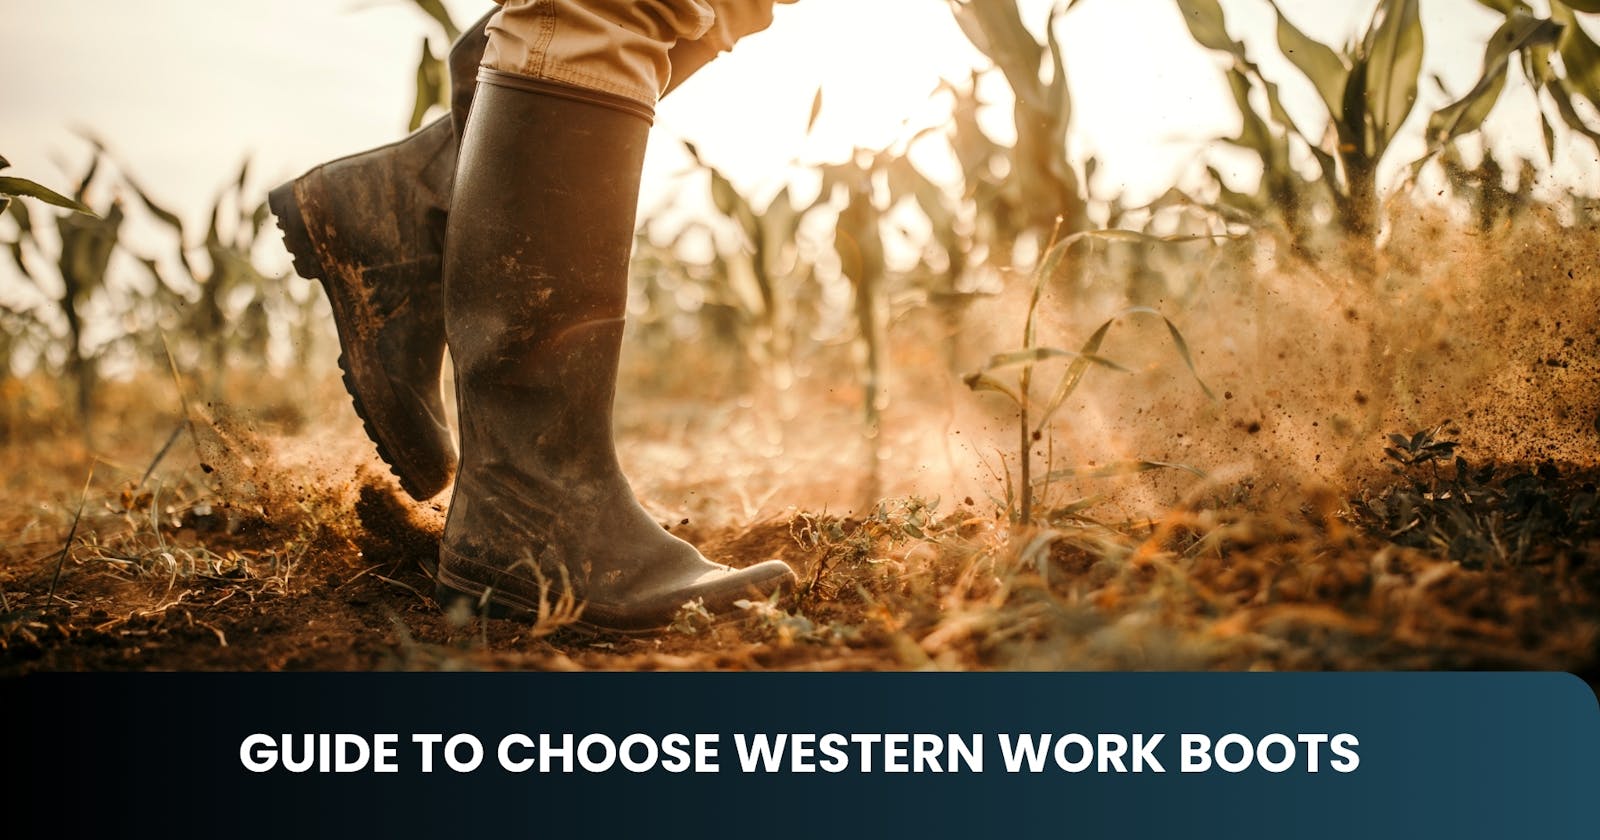 Guide to Choose Western Work Boots